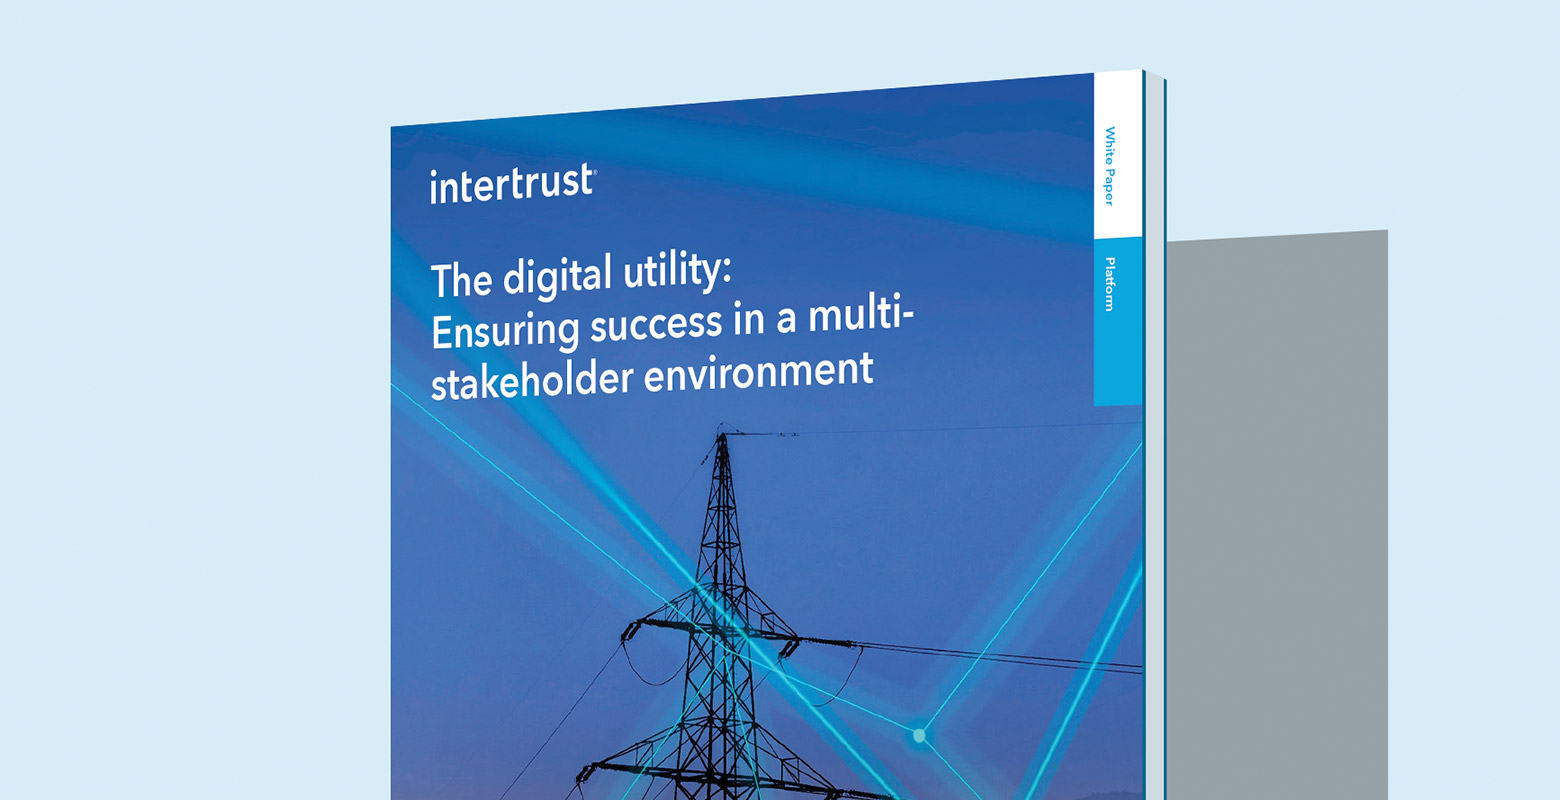 The Digital Utility: Ensuring success in a multi-stakeholder environment hero graphic